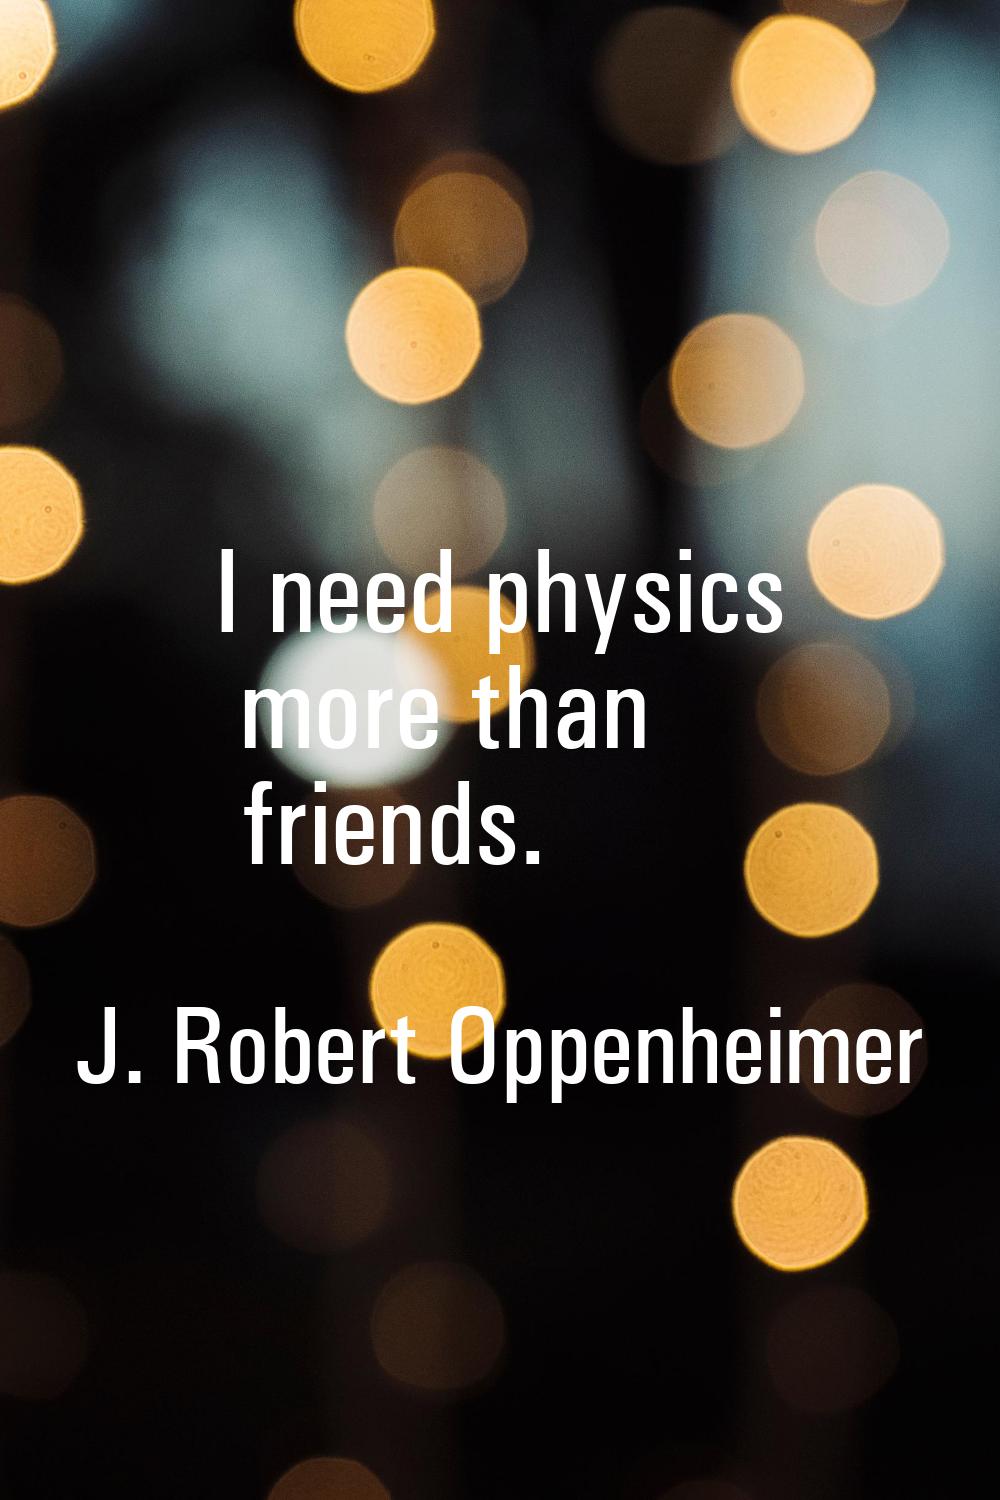 I need physics more than friends.